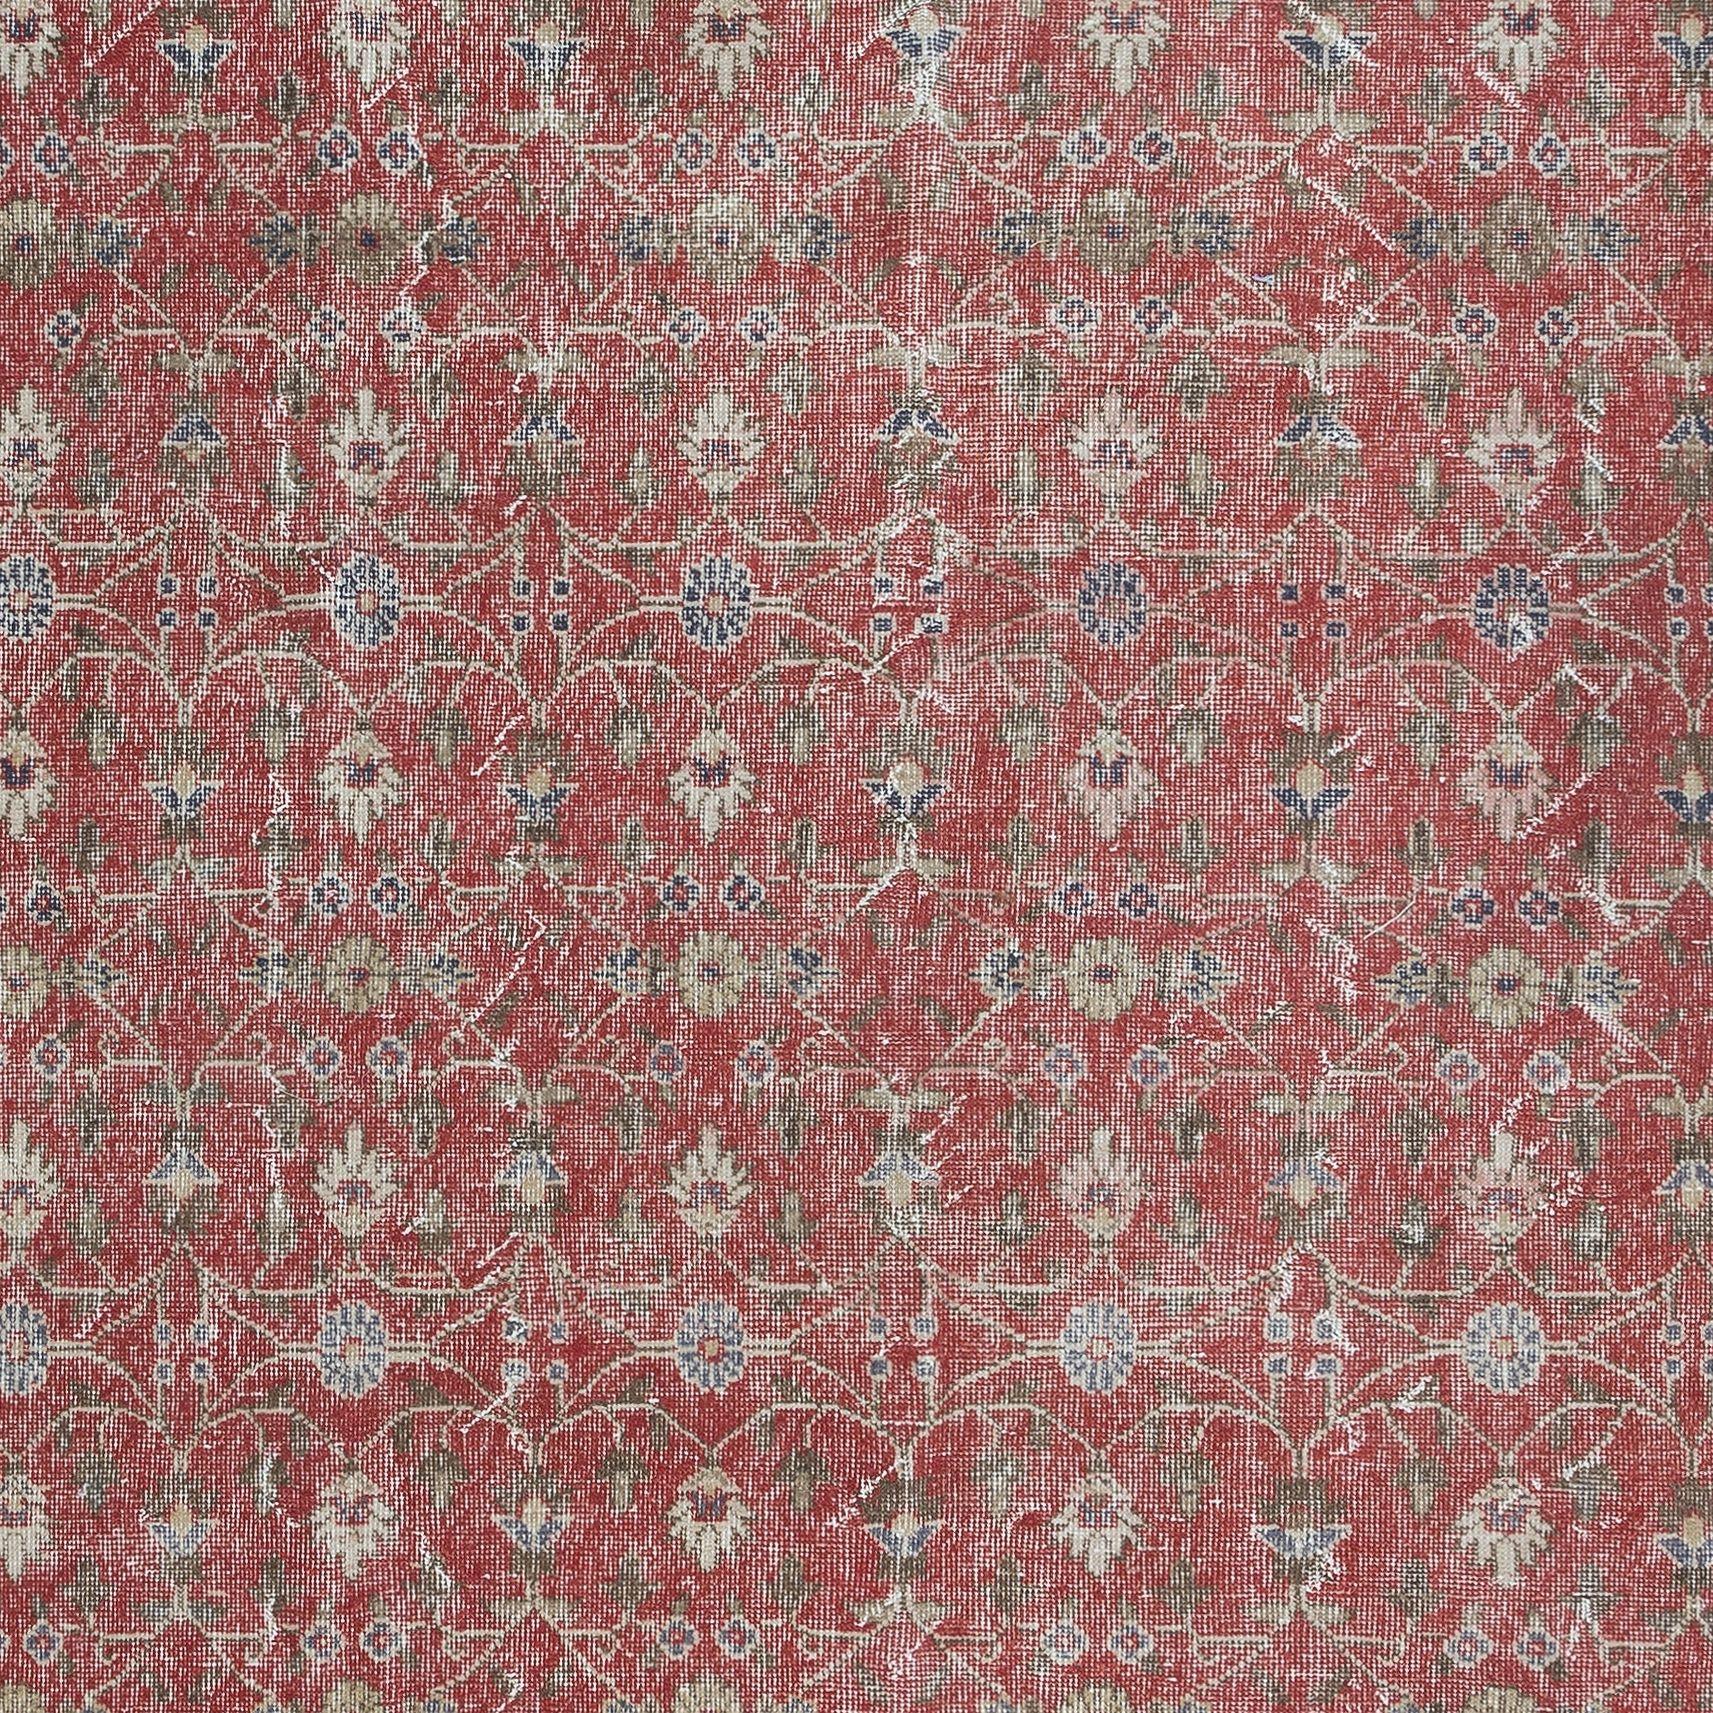 Hand-Knotted 7.2x10.6 Ft Vintage Handmade Turkish Rug in Red & Beige with Flower Design For Sale